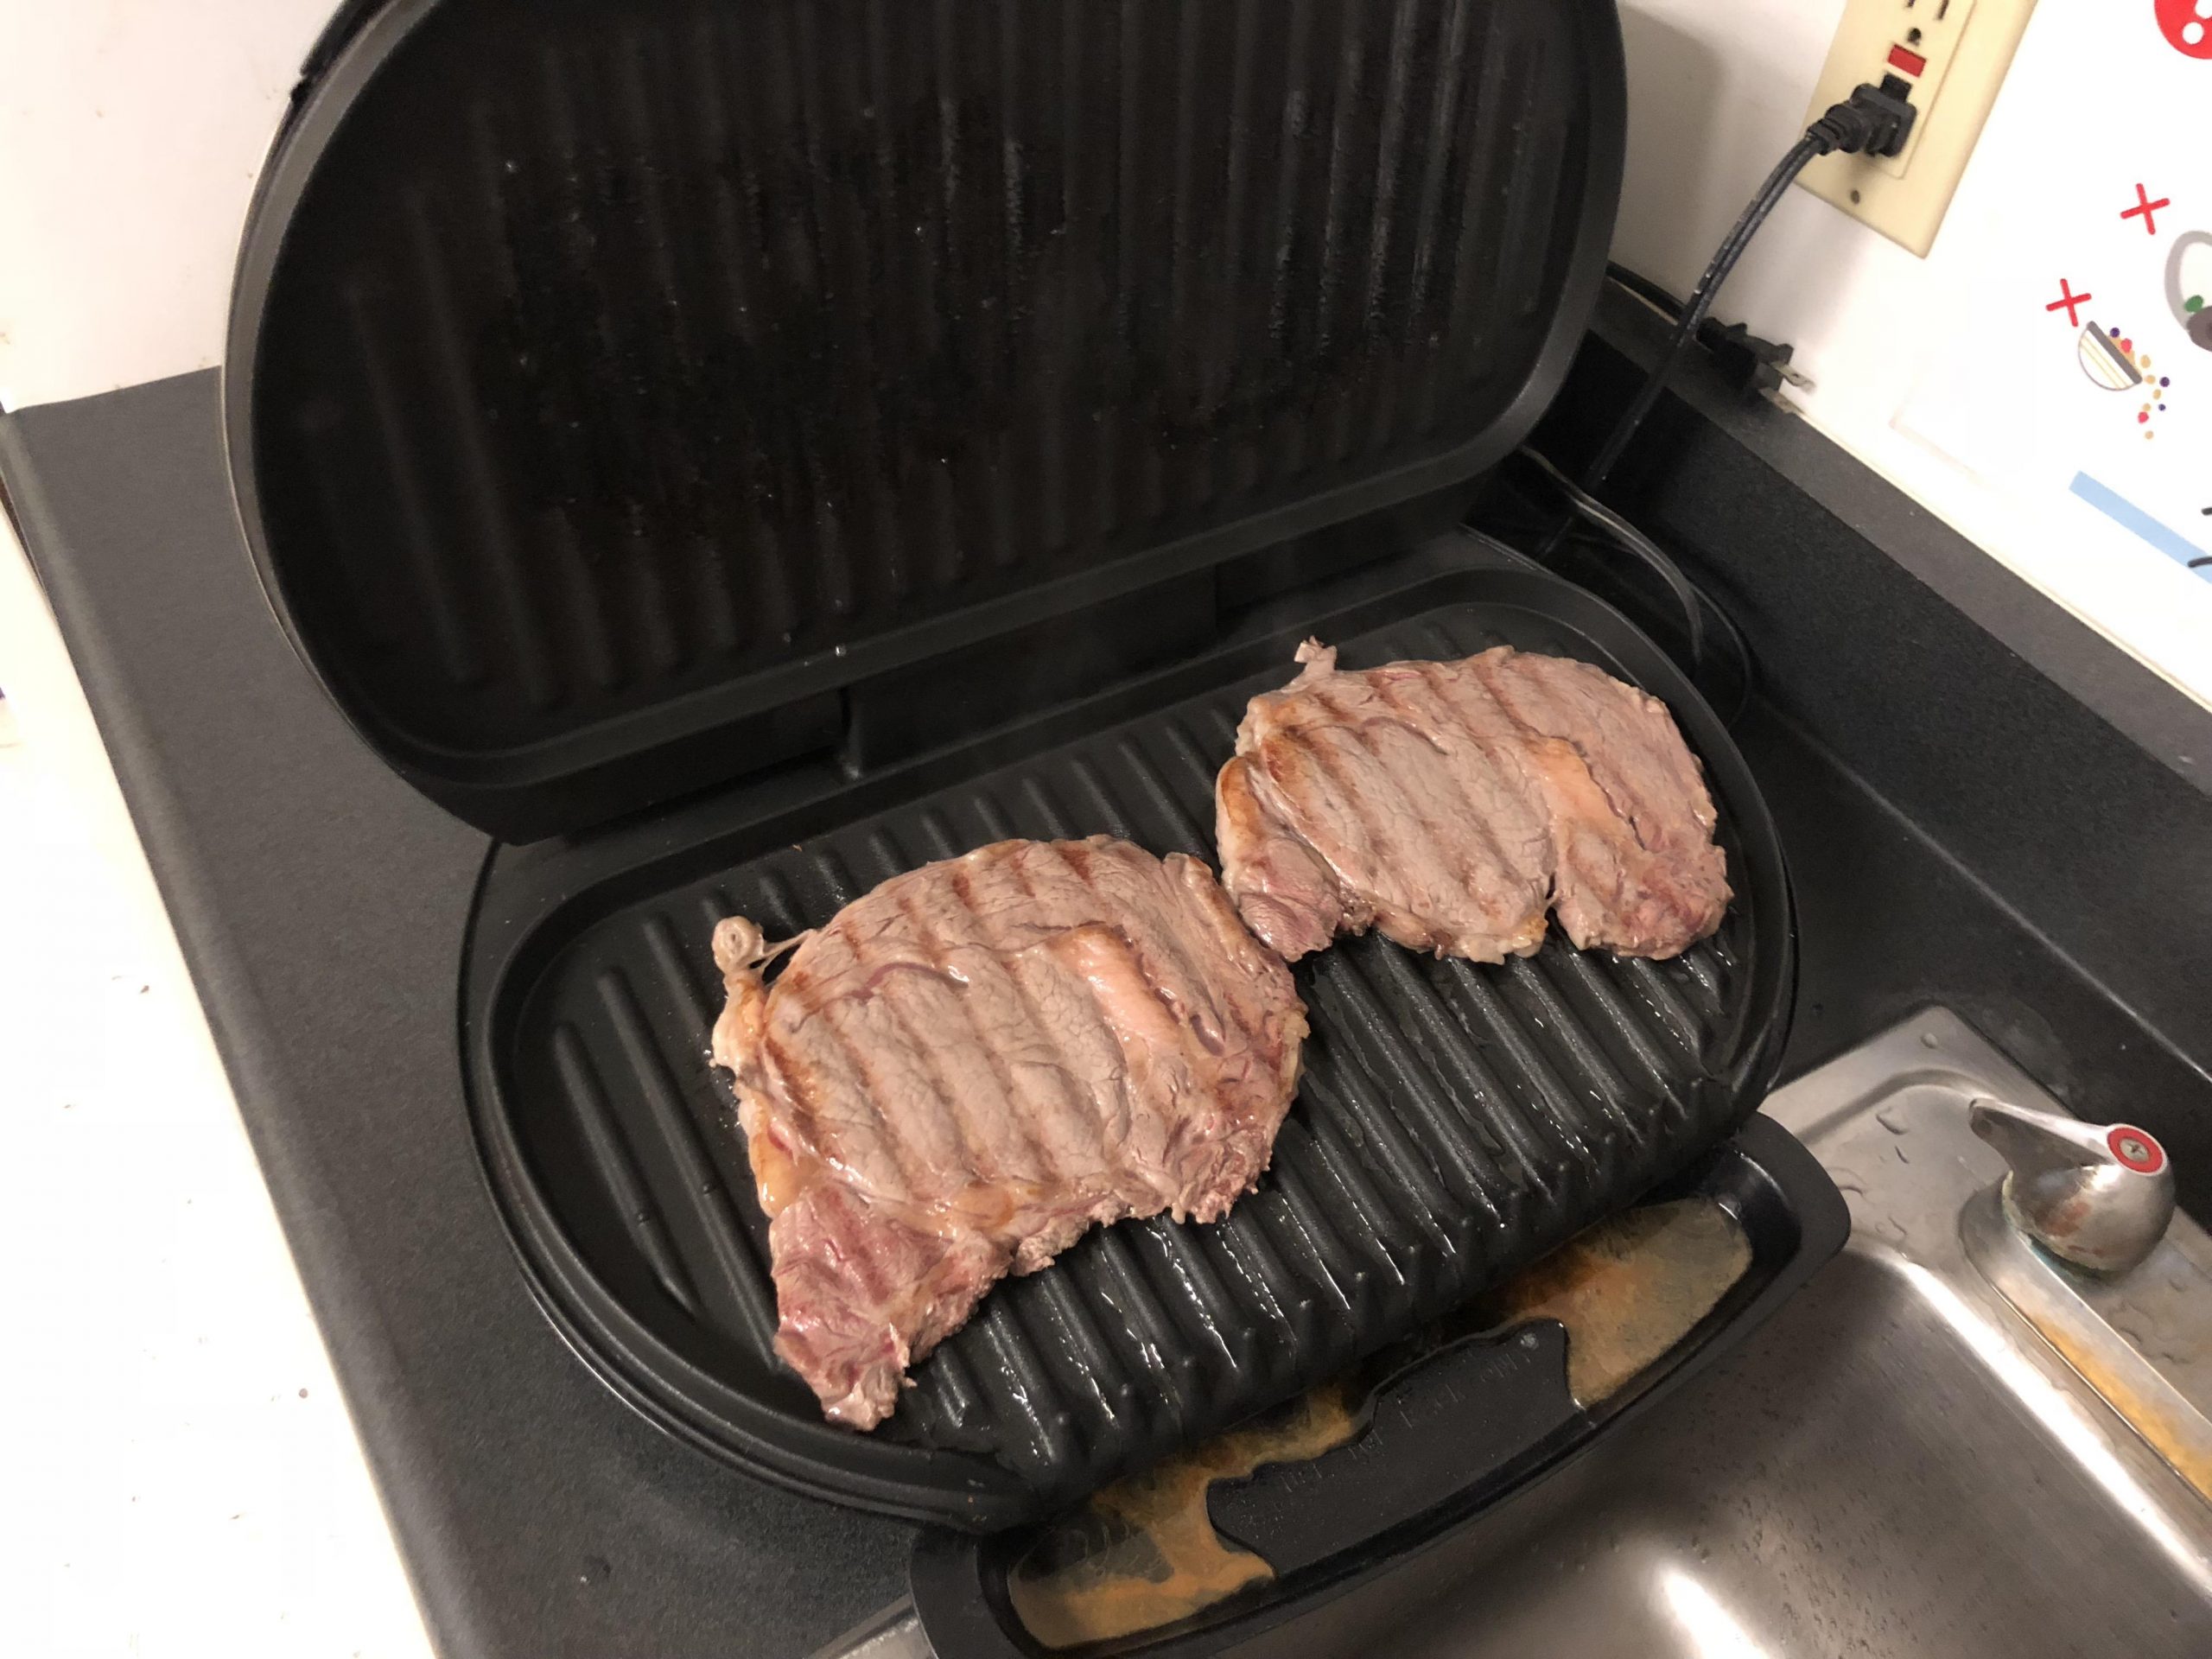 Are steaks good on george foreman grill? (Answered) - Sunset Bar